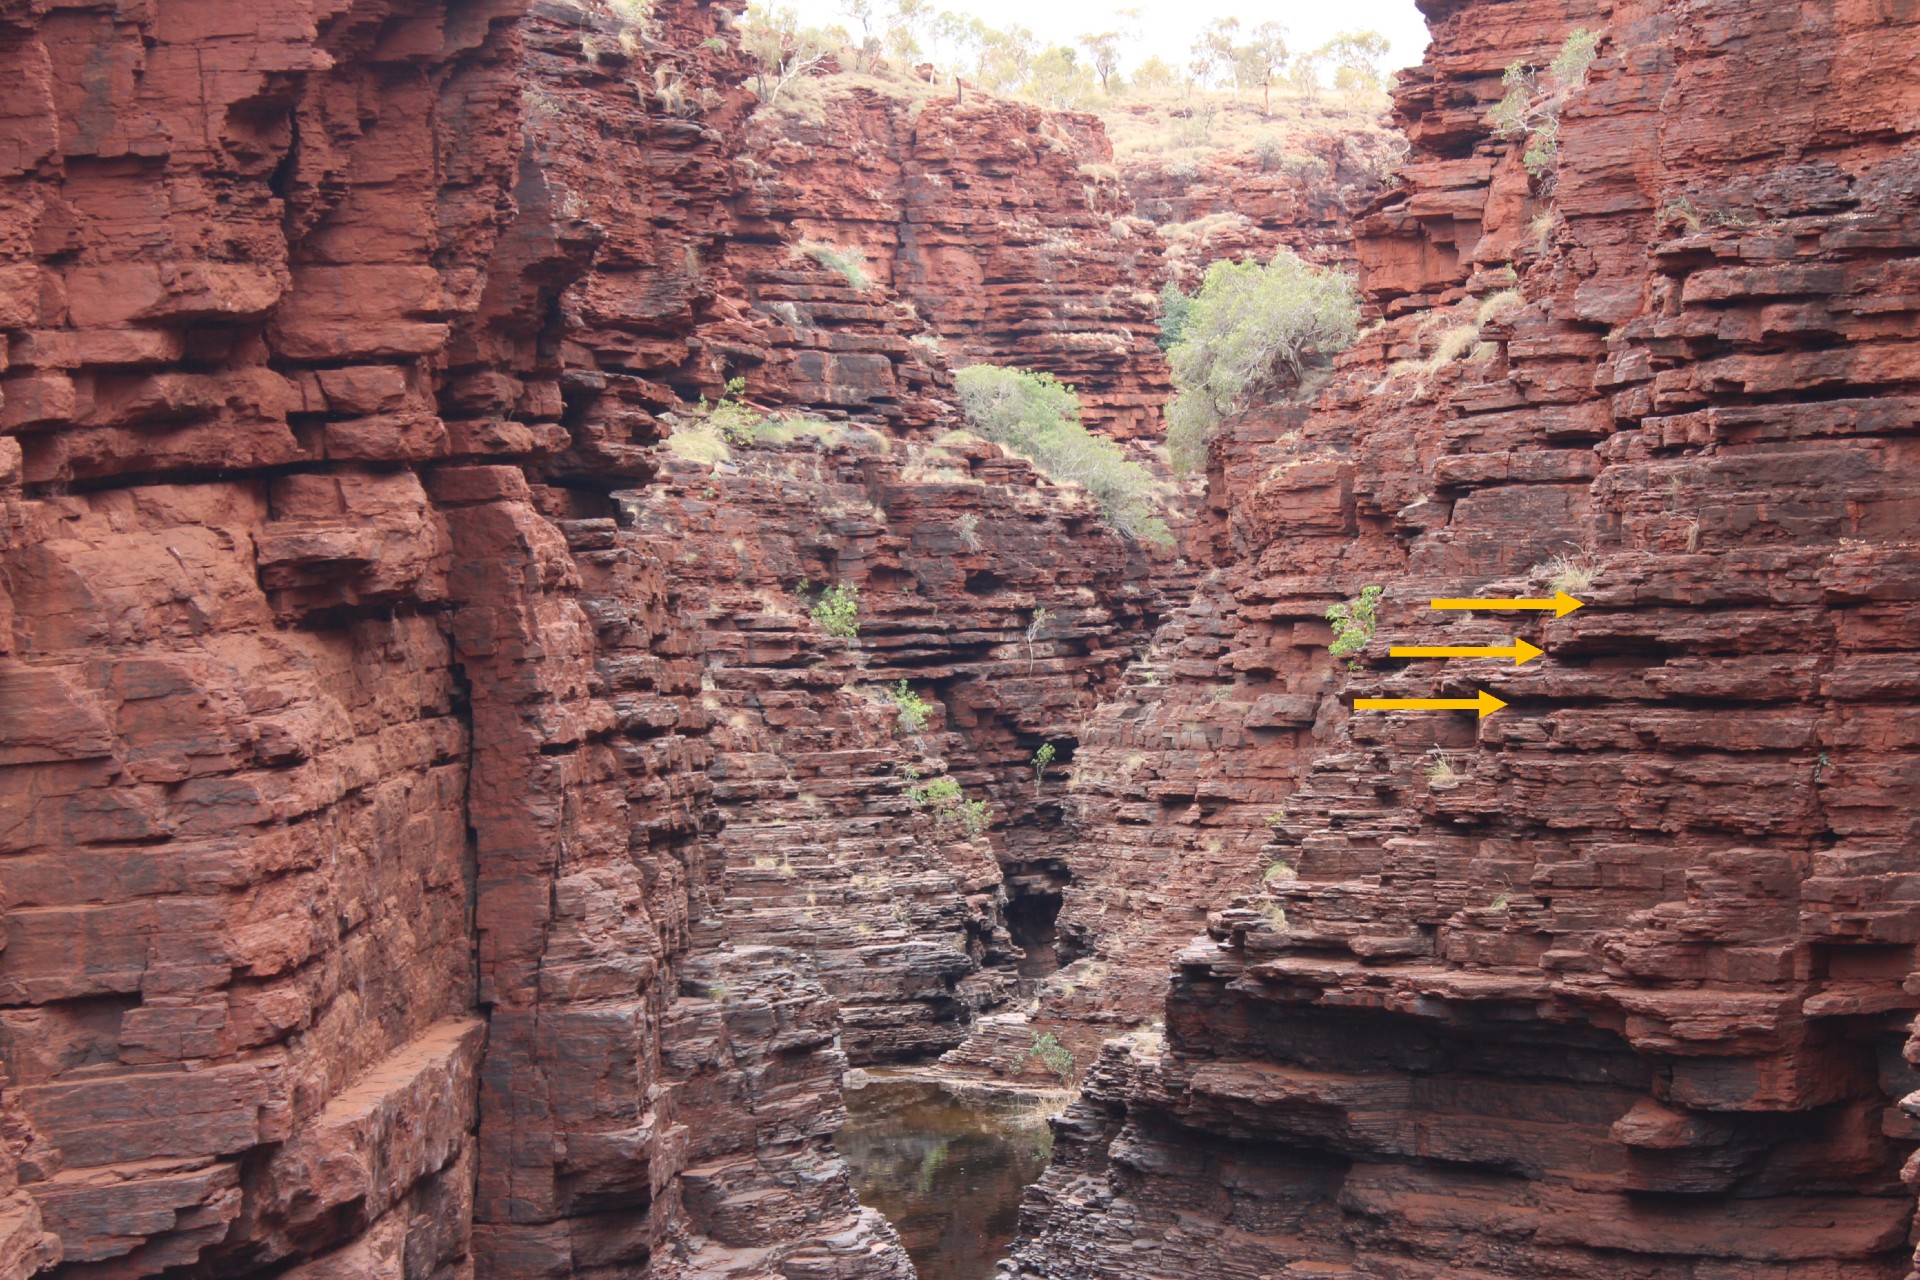 Joffre Gorge in Karijini National Park in Western Australia shows regular alternations between a reddish-brown, harder rock and a softer, clay-rich rock (indicated by arrows) with an average thickness of 85 cm.  These changes are attributed to past climate changes caused by variations in the eccentricity of the Earth's orbit.